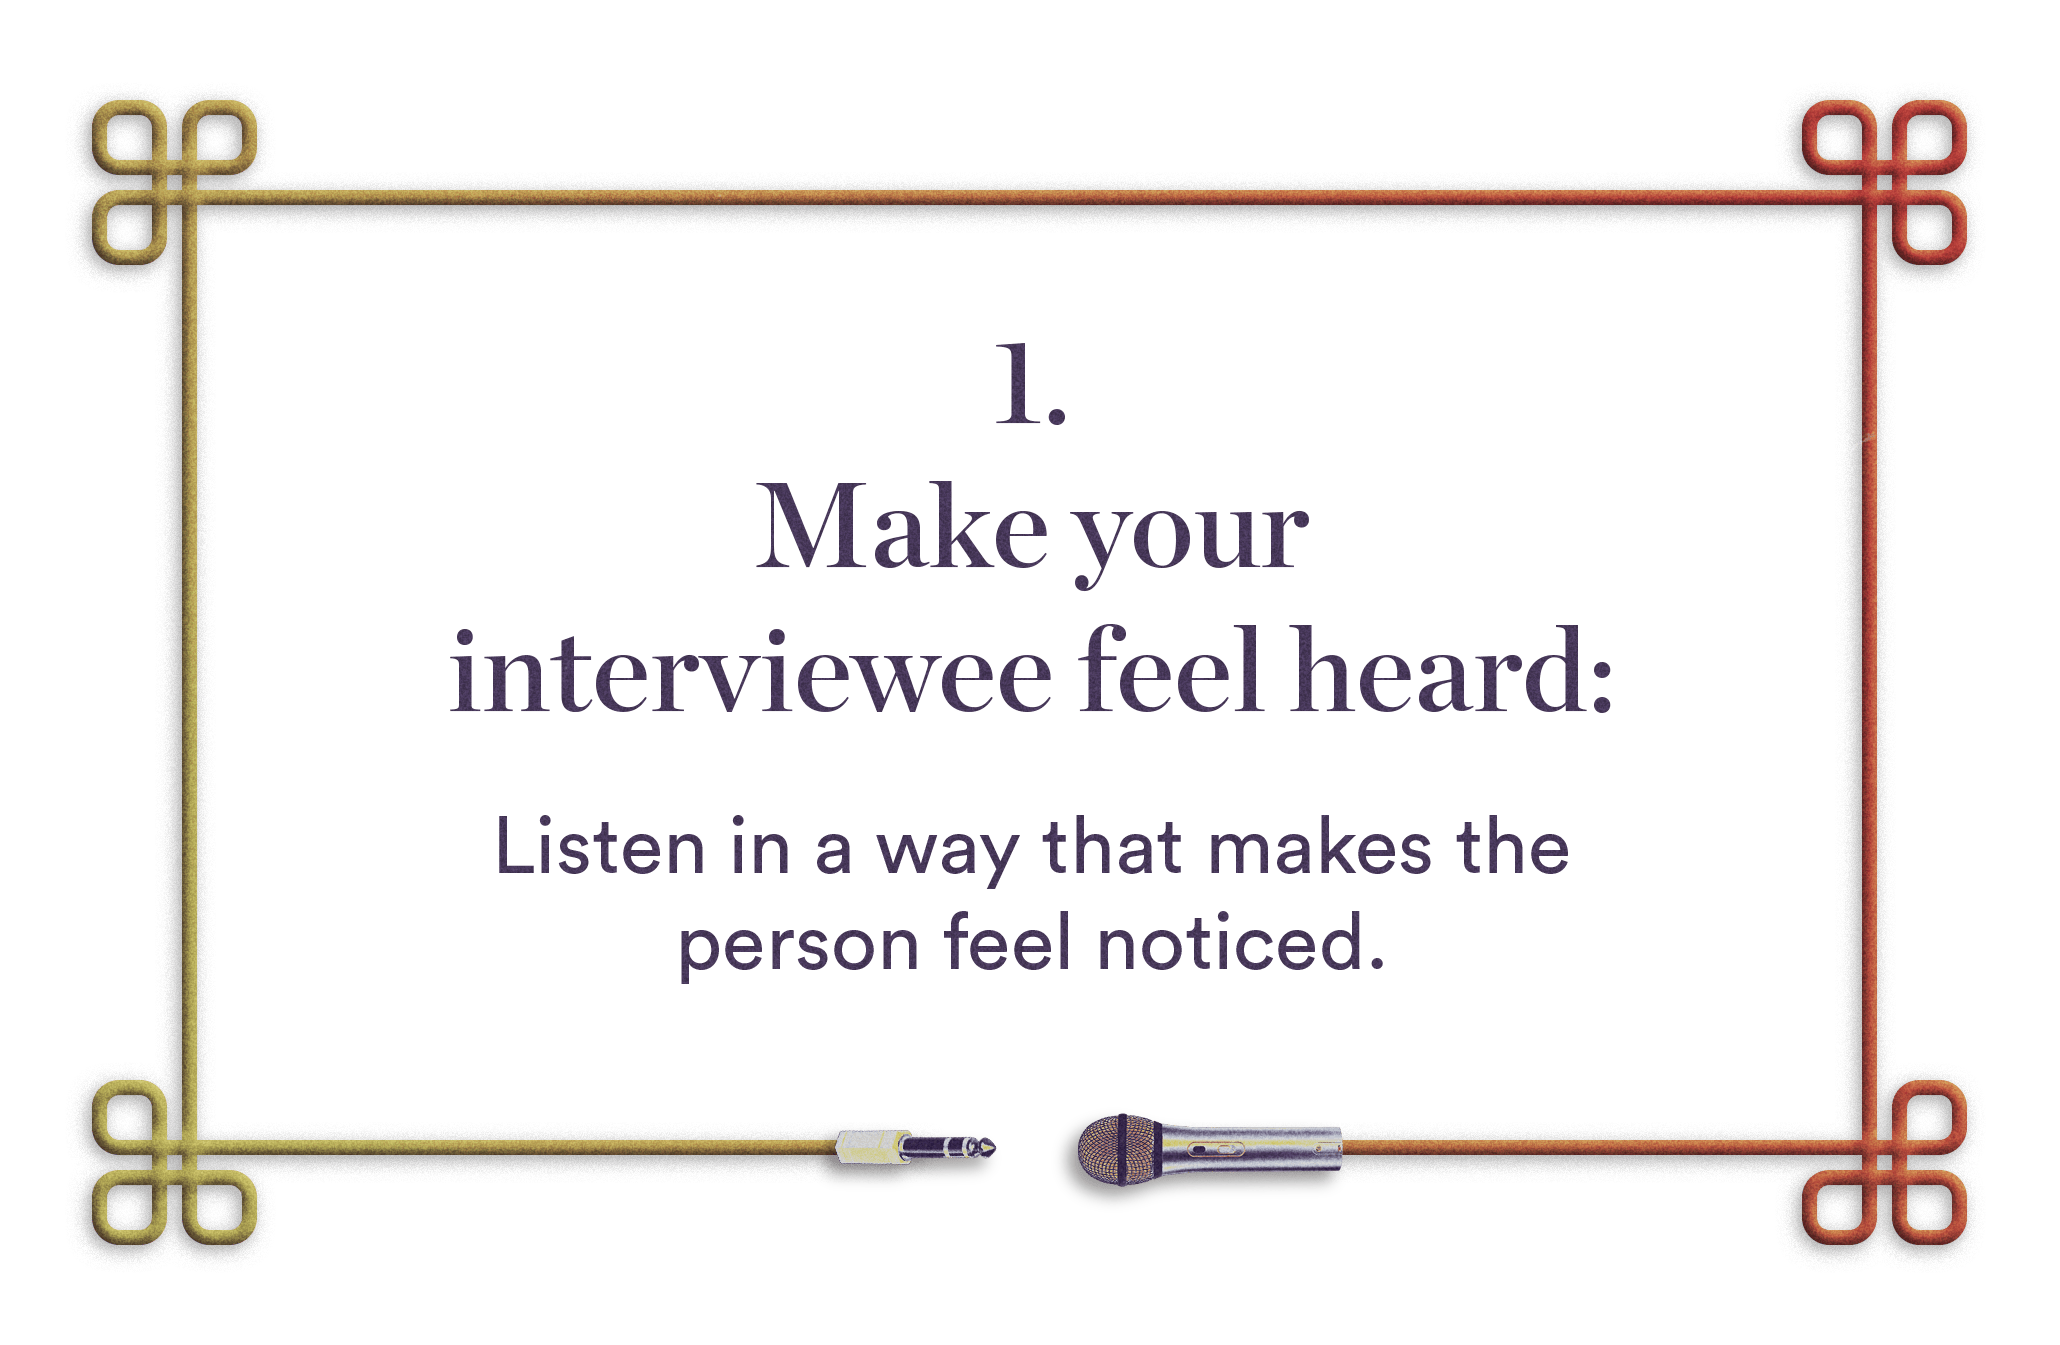 1. Make your interviewee feel heard - Listen in a way that makes the person feel noticed.